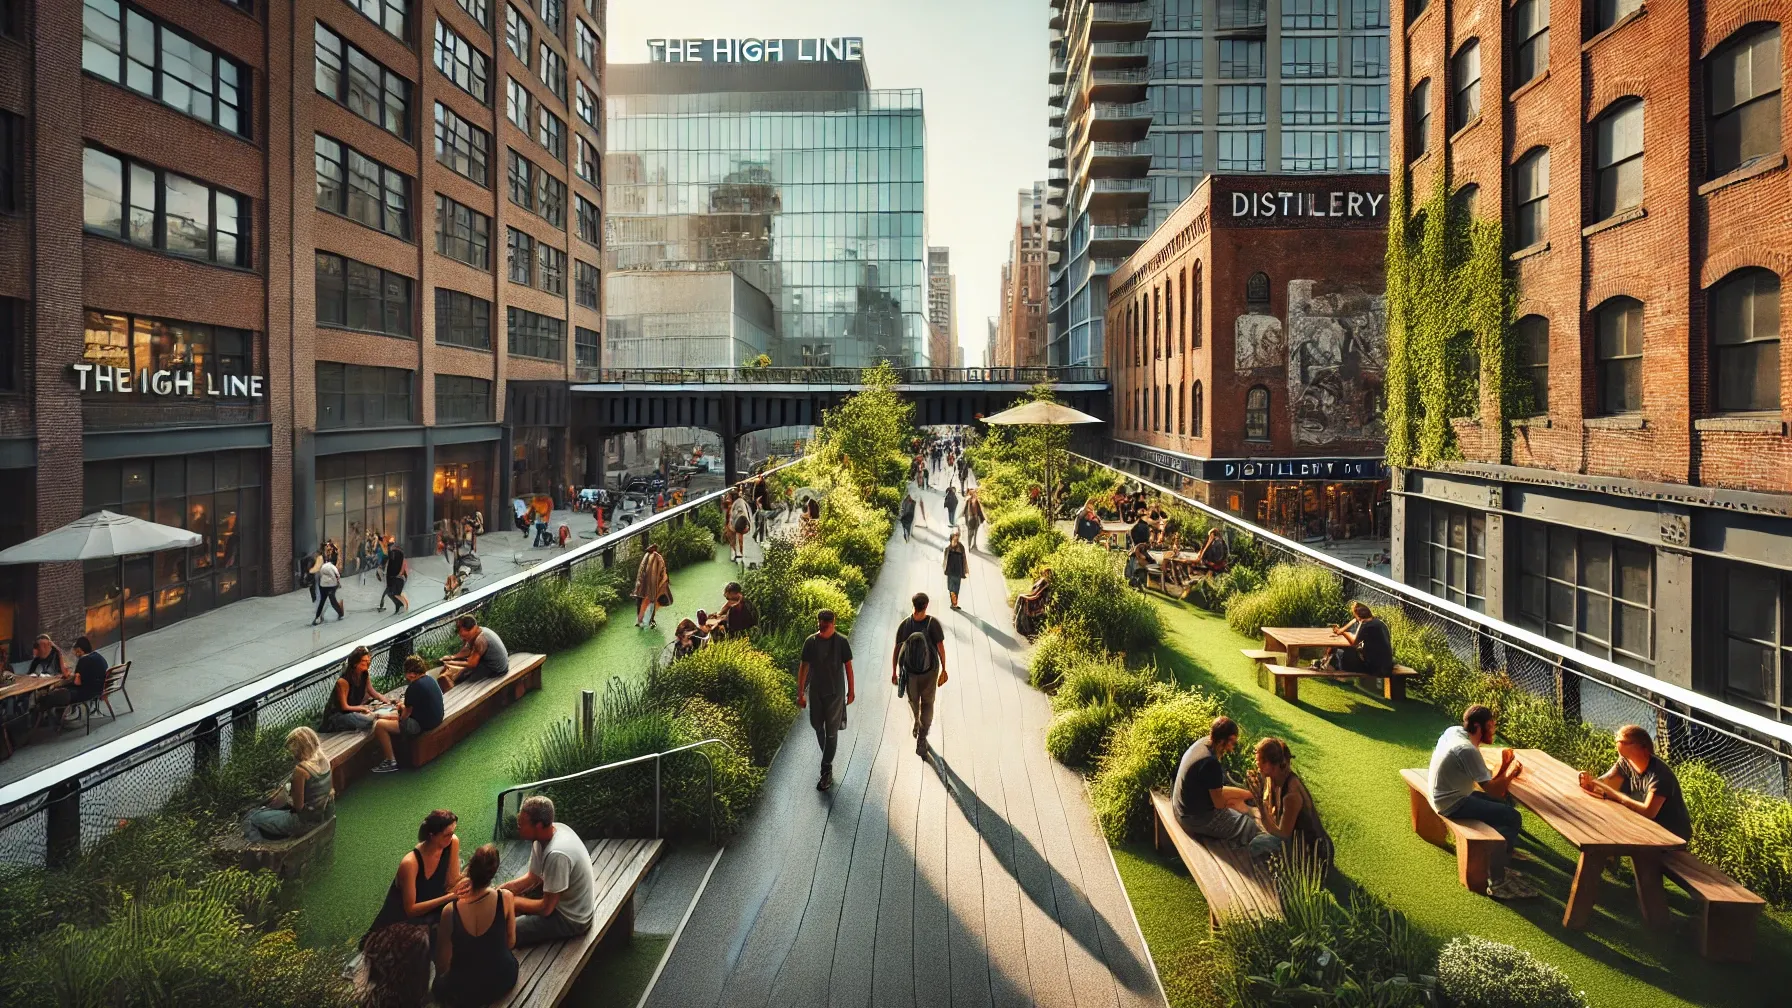 The High Line, an elevated urban park in New York City